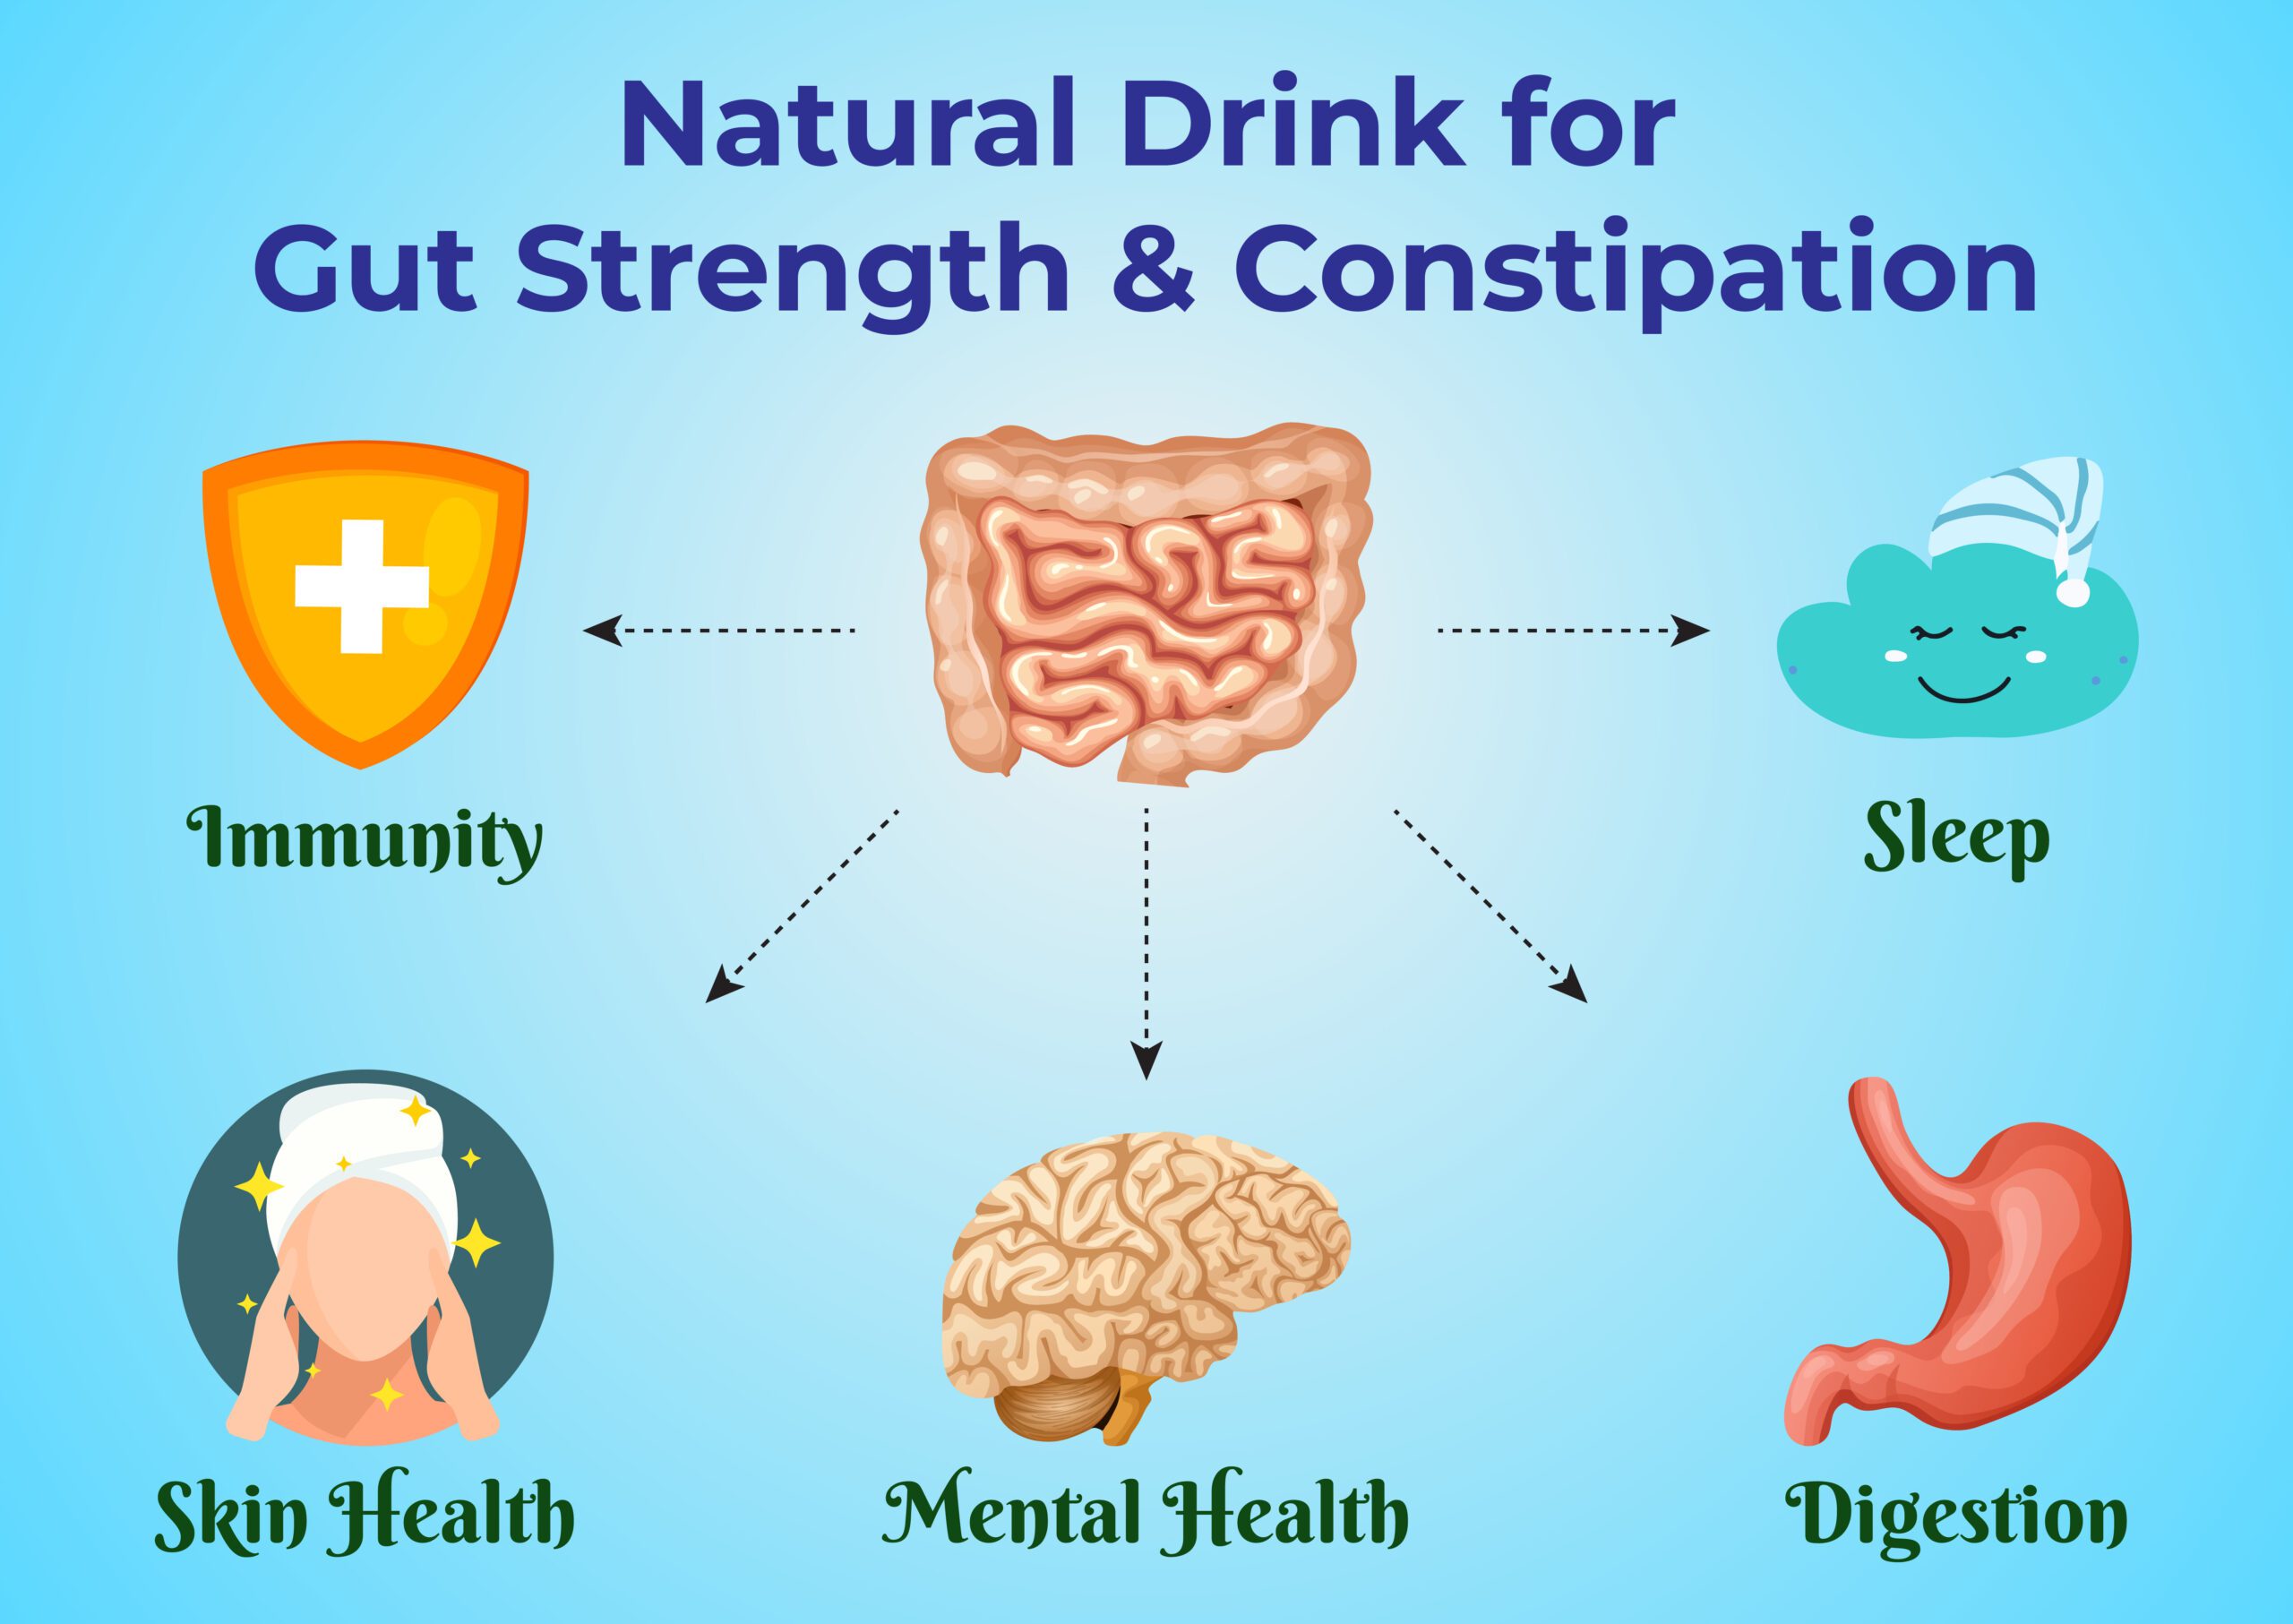 Natural Drink for Guts Strength and Constipation